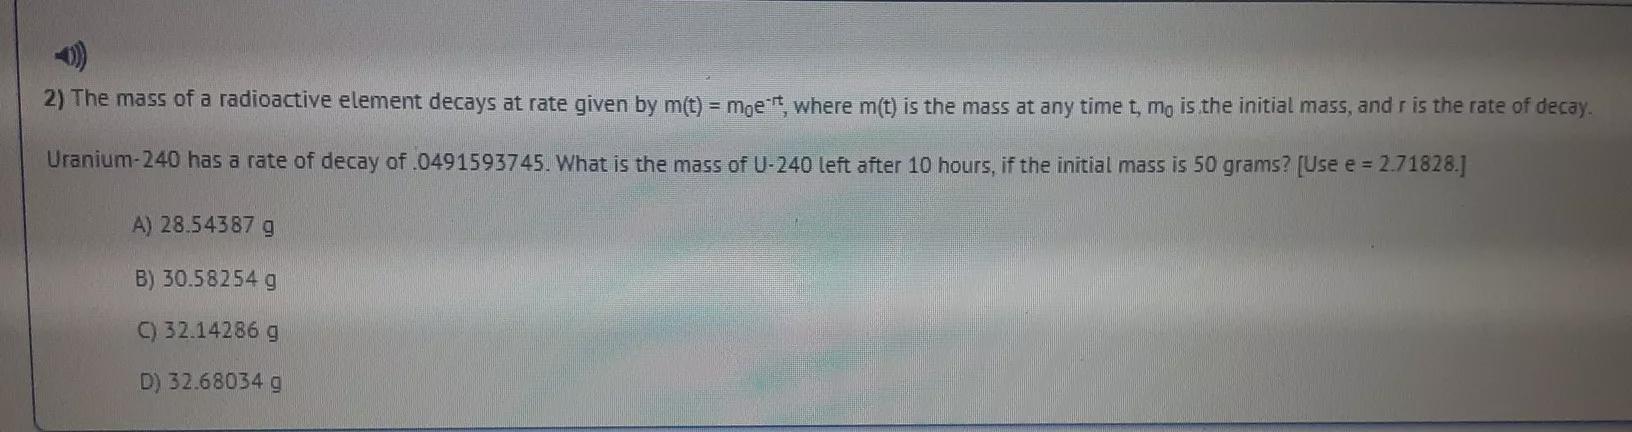 2) The Mass Of A Radioactive Element Decays At Rate Given By M(t) = M0e^-rt, Where M(t) Is The Mass At